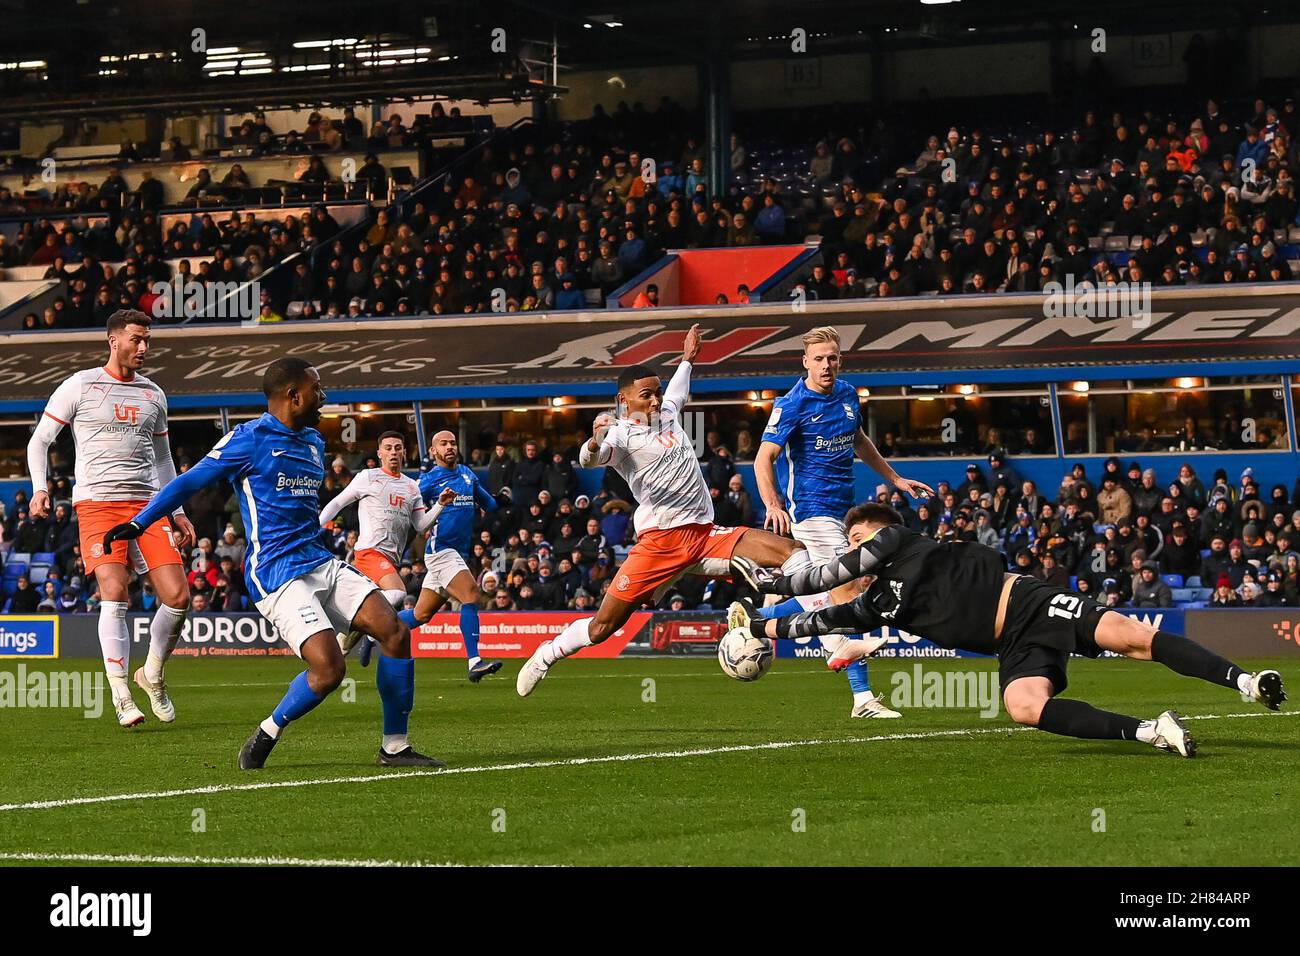 Matija Šarkic #13 of Birmingham City at the feet of Demi Mitchell #15 of Blackpool in, on 11/27/2021. (Photo by Craig Thomas/News Images/Sipa USA) Credit: Sipa USA/Alamy Live News Stock Photo